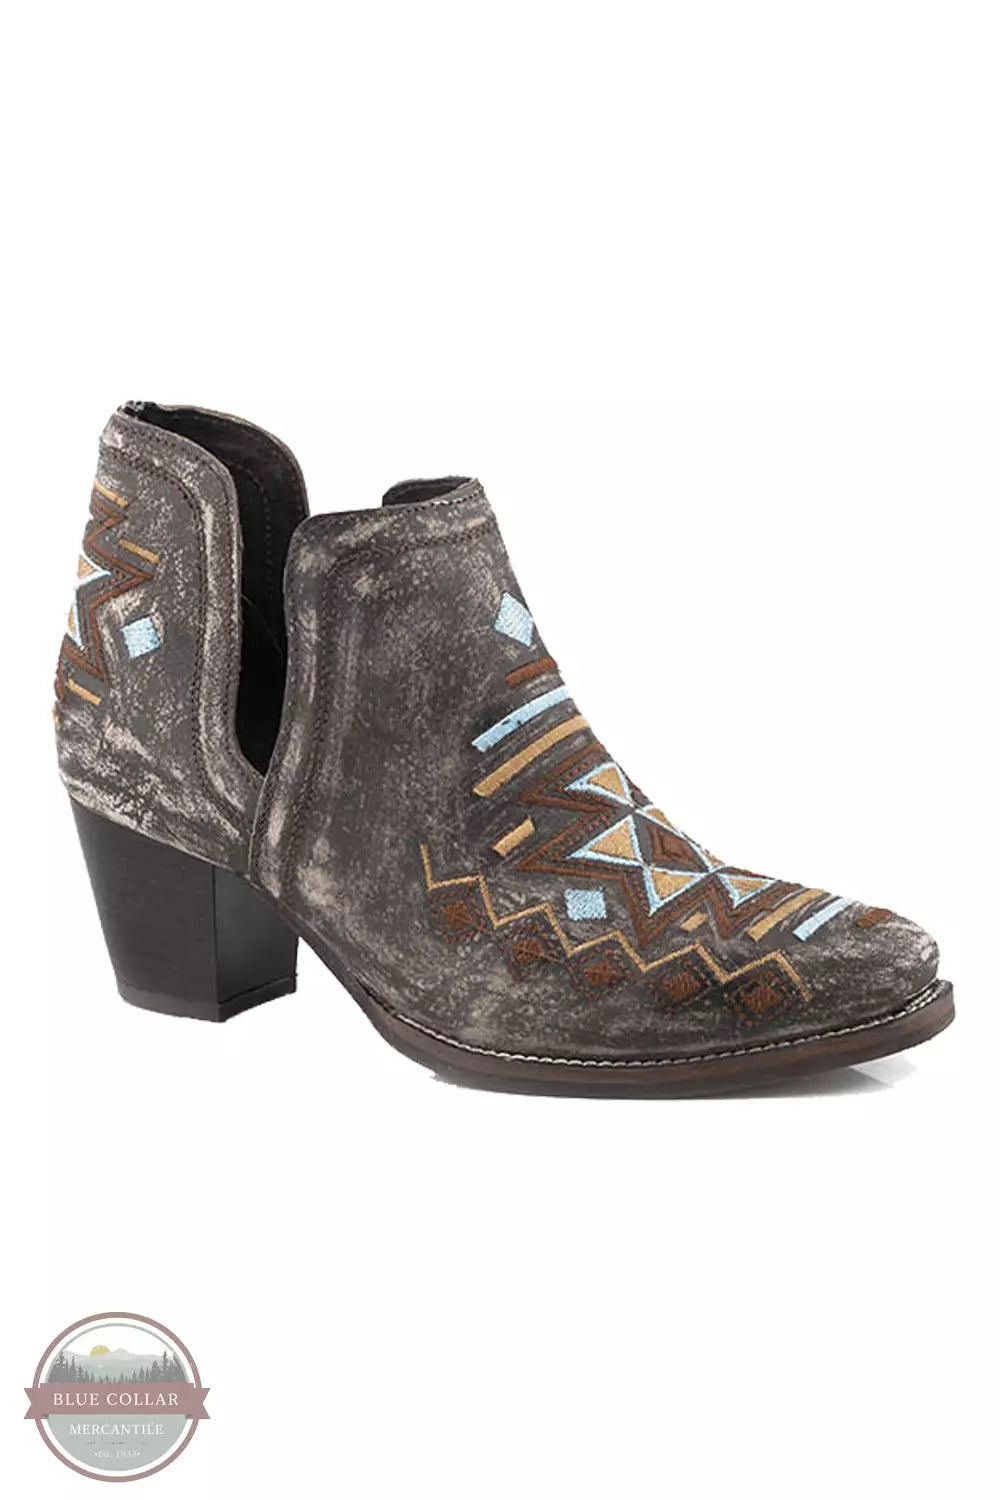 Roper 09-021-0981-3214 BR Rowdy Aztec Suede Snip Toe Shorty Western Boot in Vintage Brown Profile View